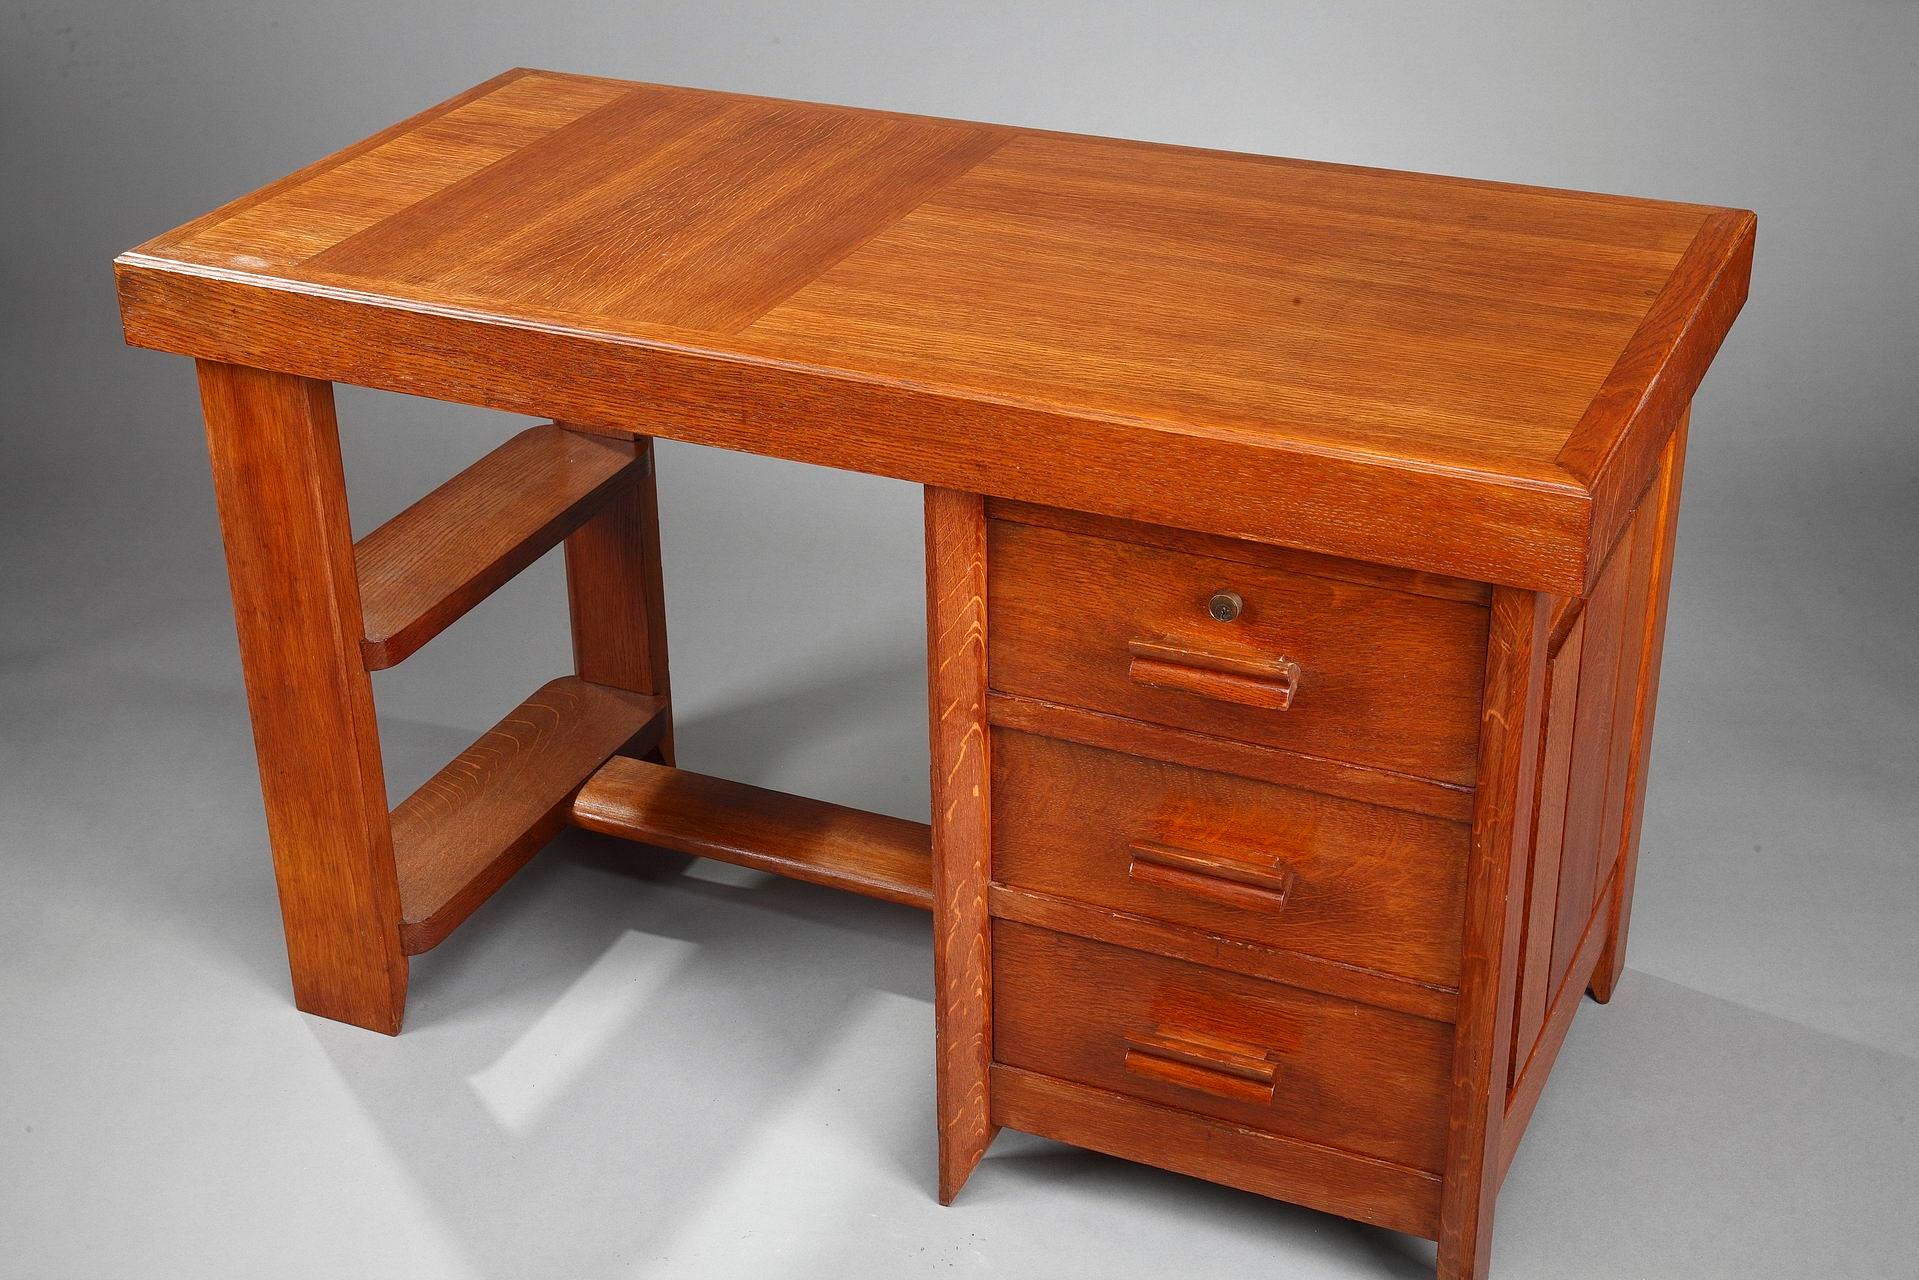 Charles Dudouyt desk crafted in oak and veneer, with extendable leaf (L:50cm). This small desk has 3 drawers and 2 shelves underneath. Designed by Pierre Bloch & Charles Dudouyt (French, 1885-1946) and manufactured by La Gentilhommière (1933-1960)